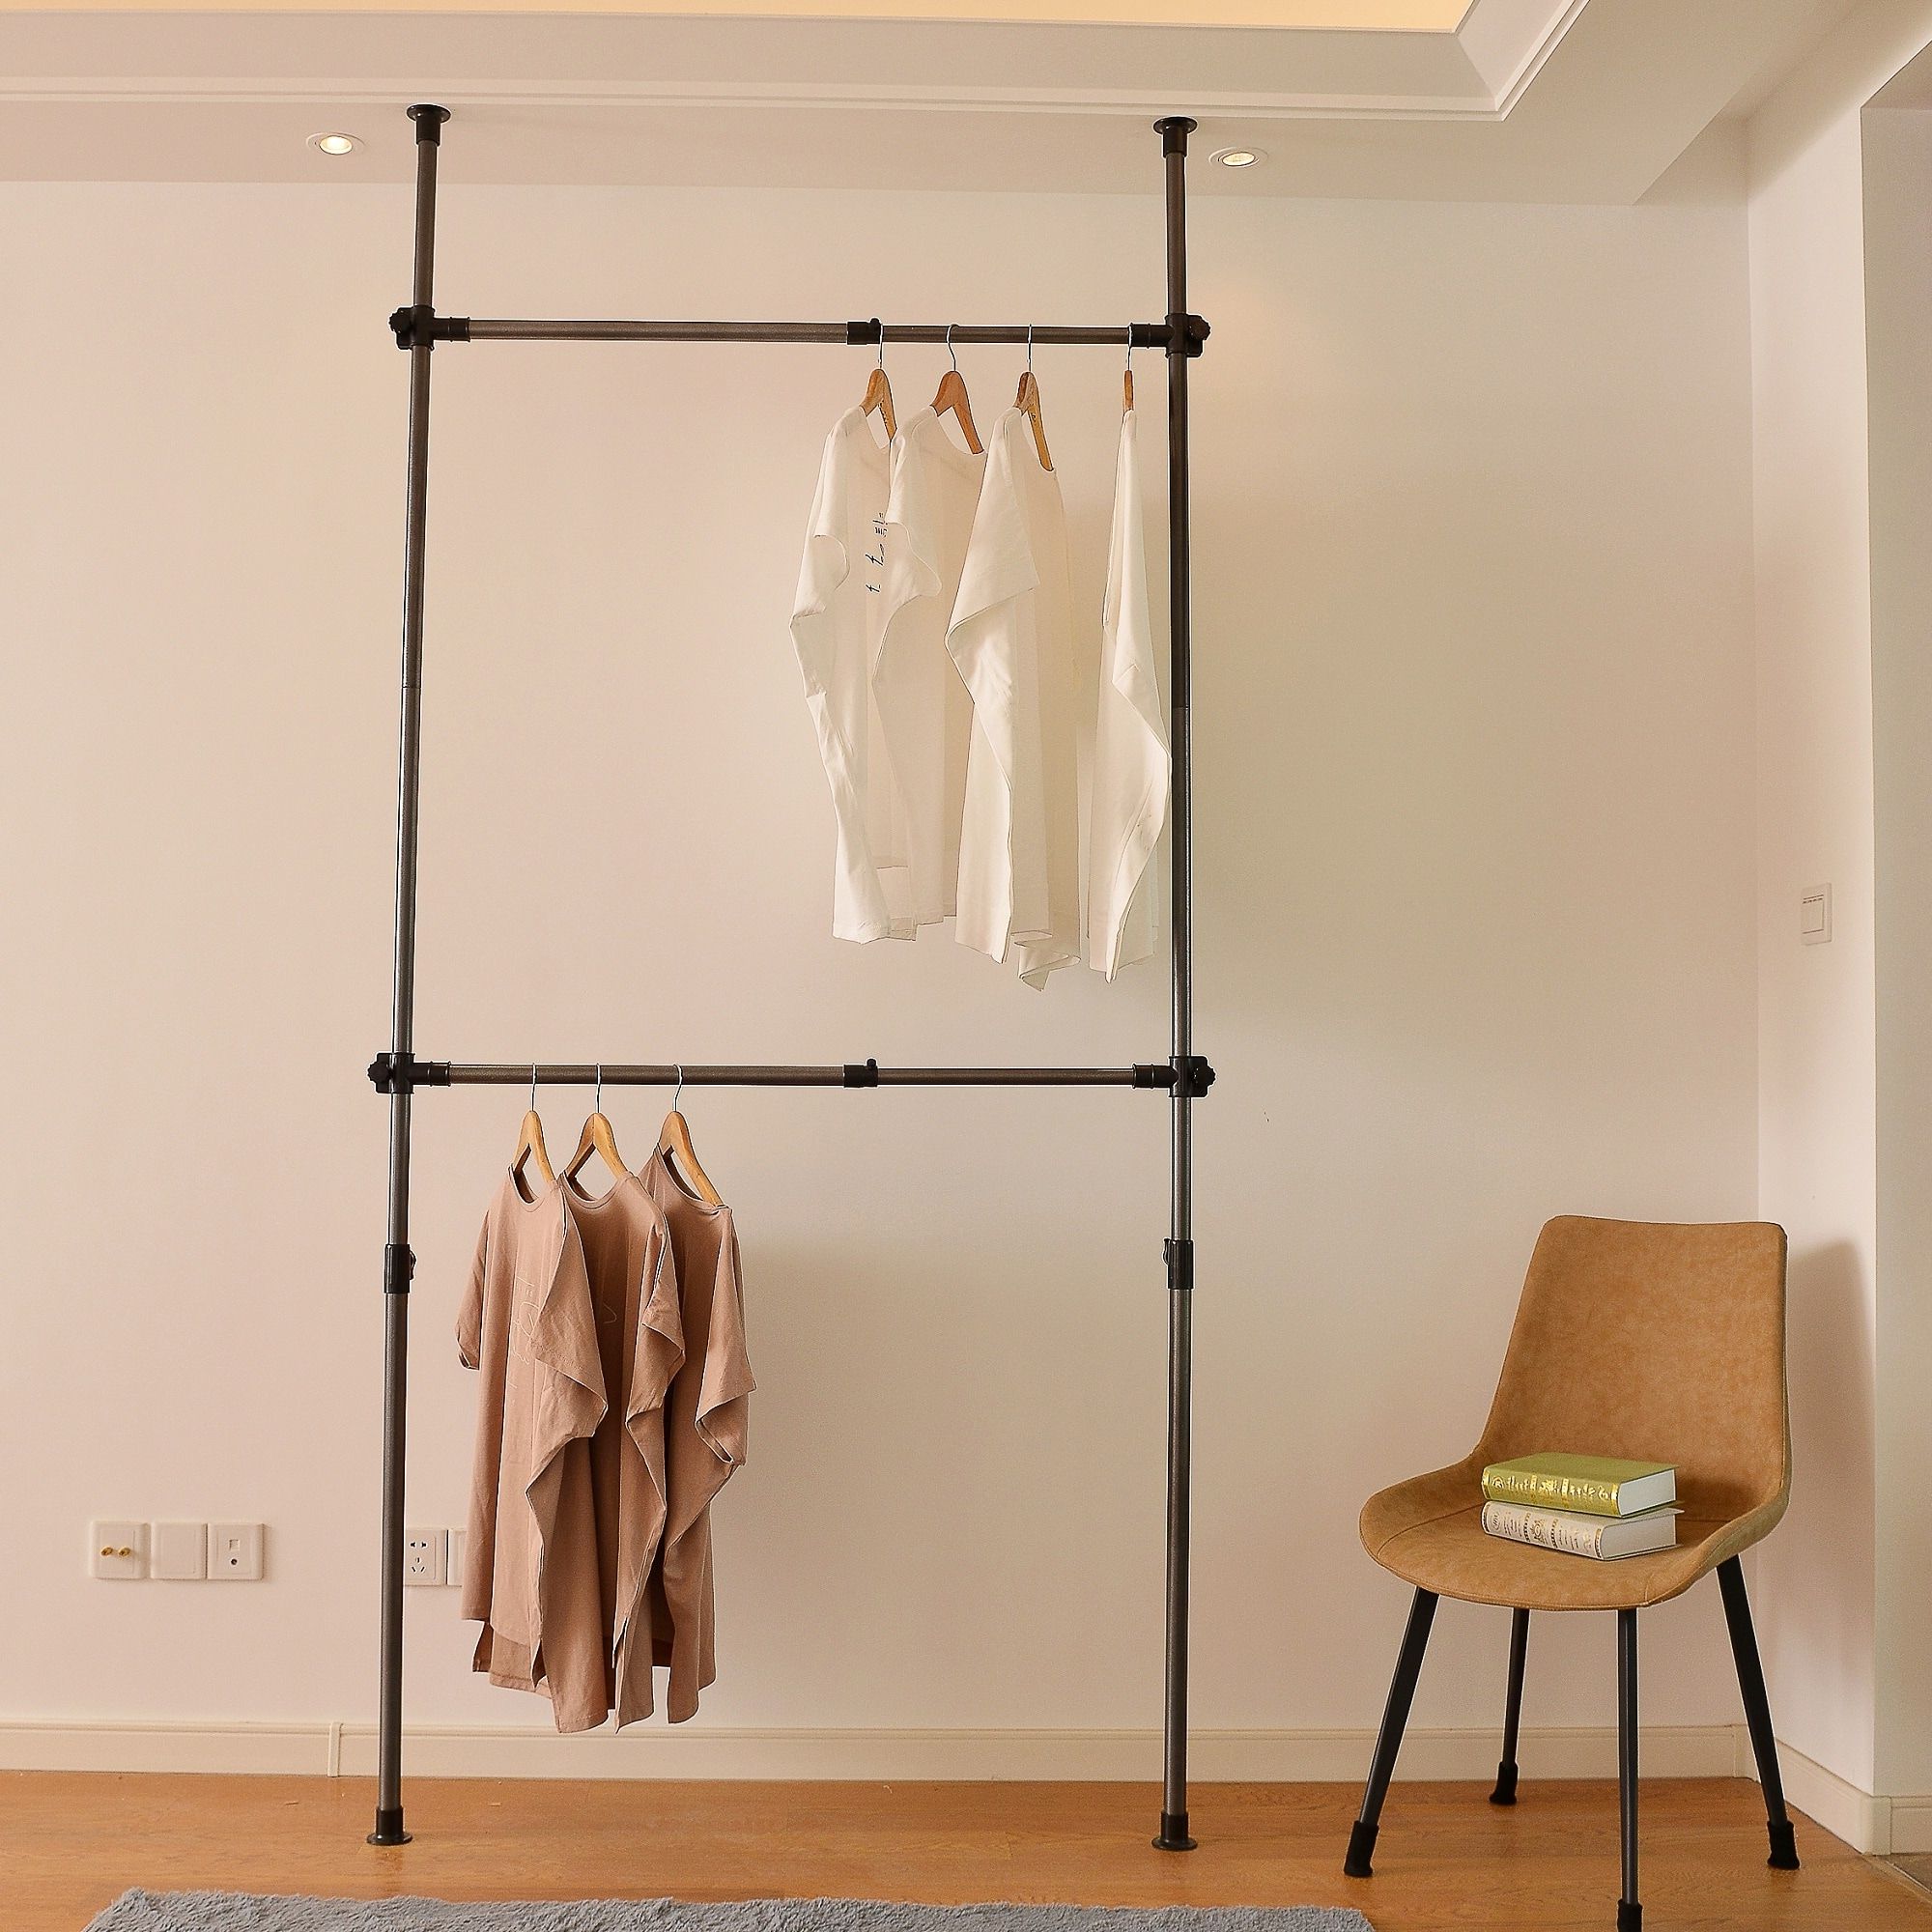 Adjustable Clothing Rack Double Rod Clothing Rack 2 Tier Clothes Rack  Adjustable Hanger For Hanging Clothes Closet Rack – Bed Bath & Beyond –  36079003 Within 2 Tier Adjustable Wardrobes (Gallery 18 of 20)